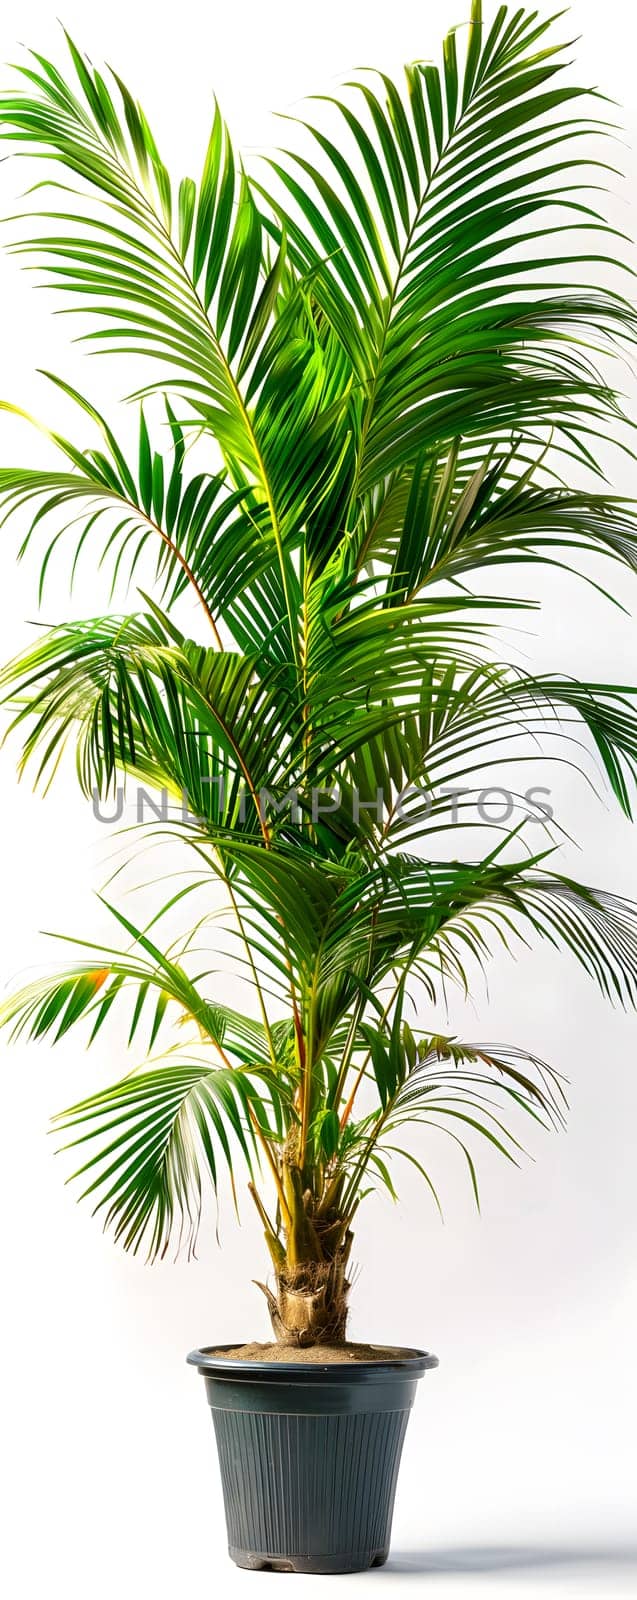 A potted palm tree, a type of terrestrial plant from the Arecales order, stands against a white background. This evergreen tree brings a tropical touch to any landscape or event